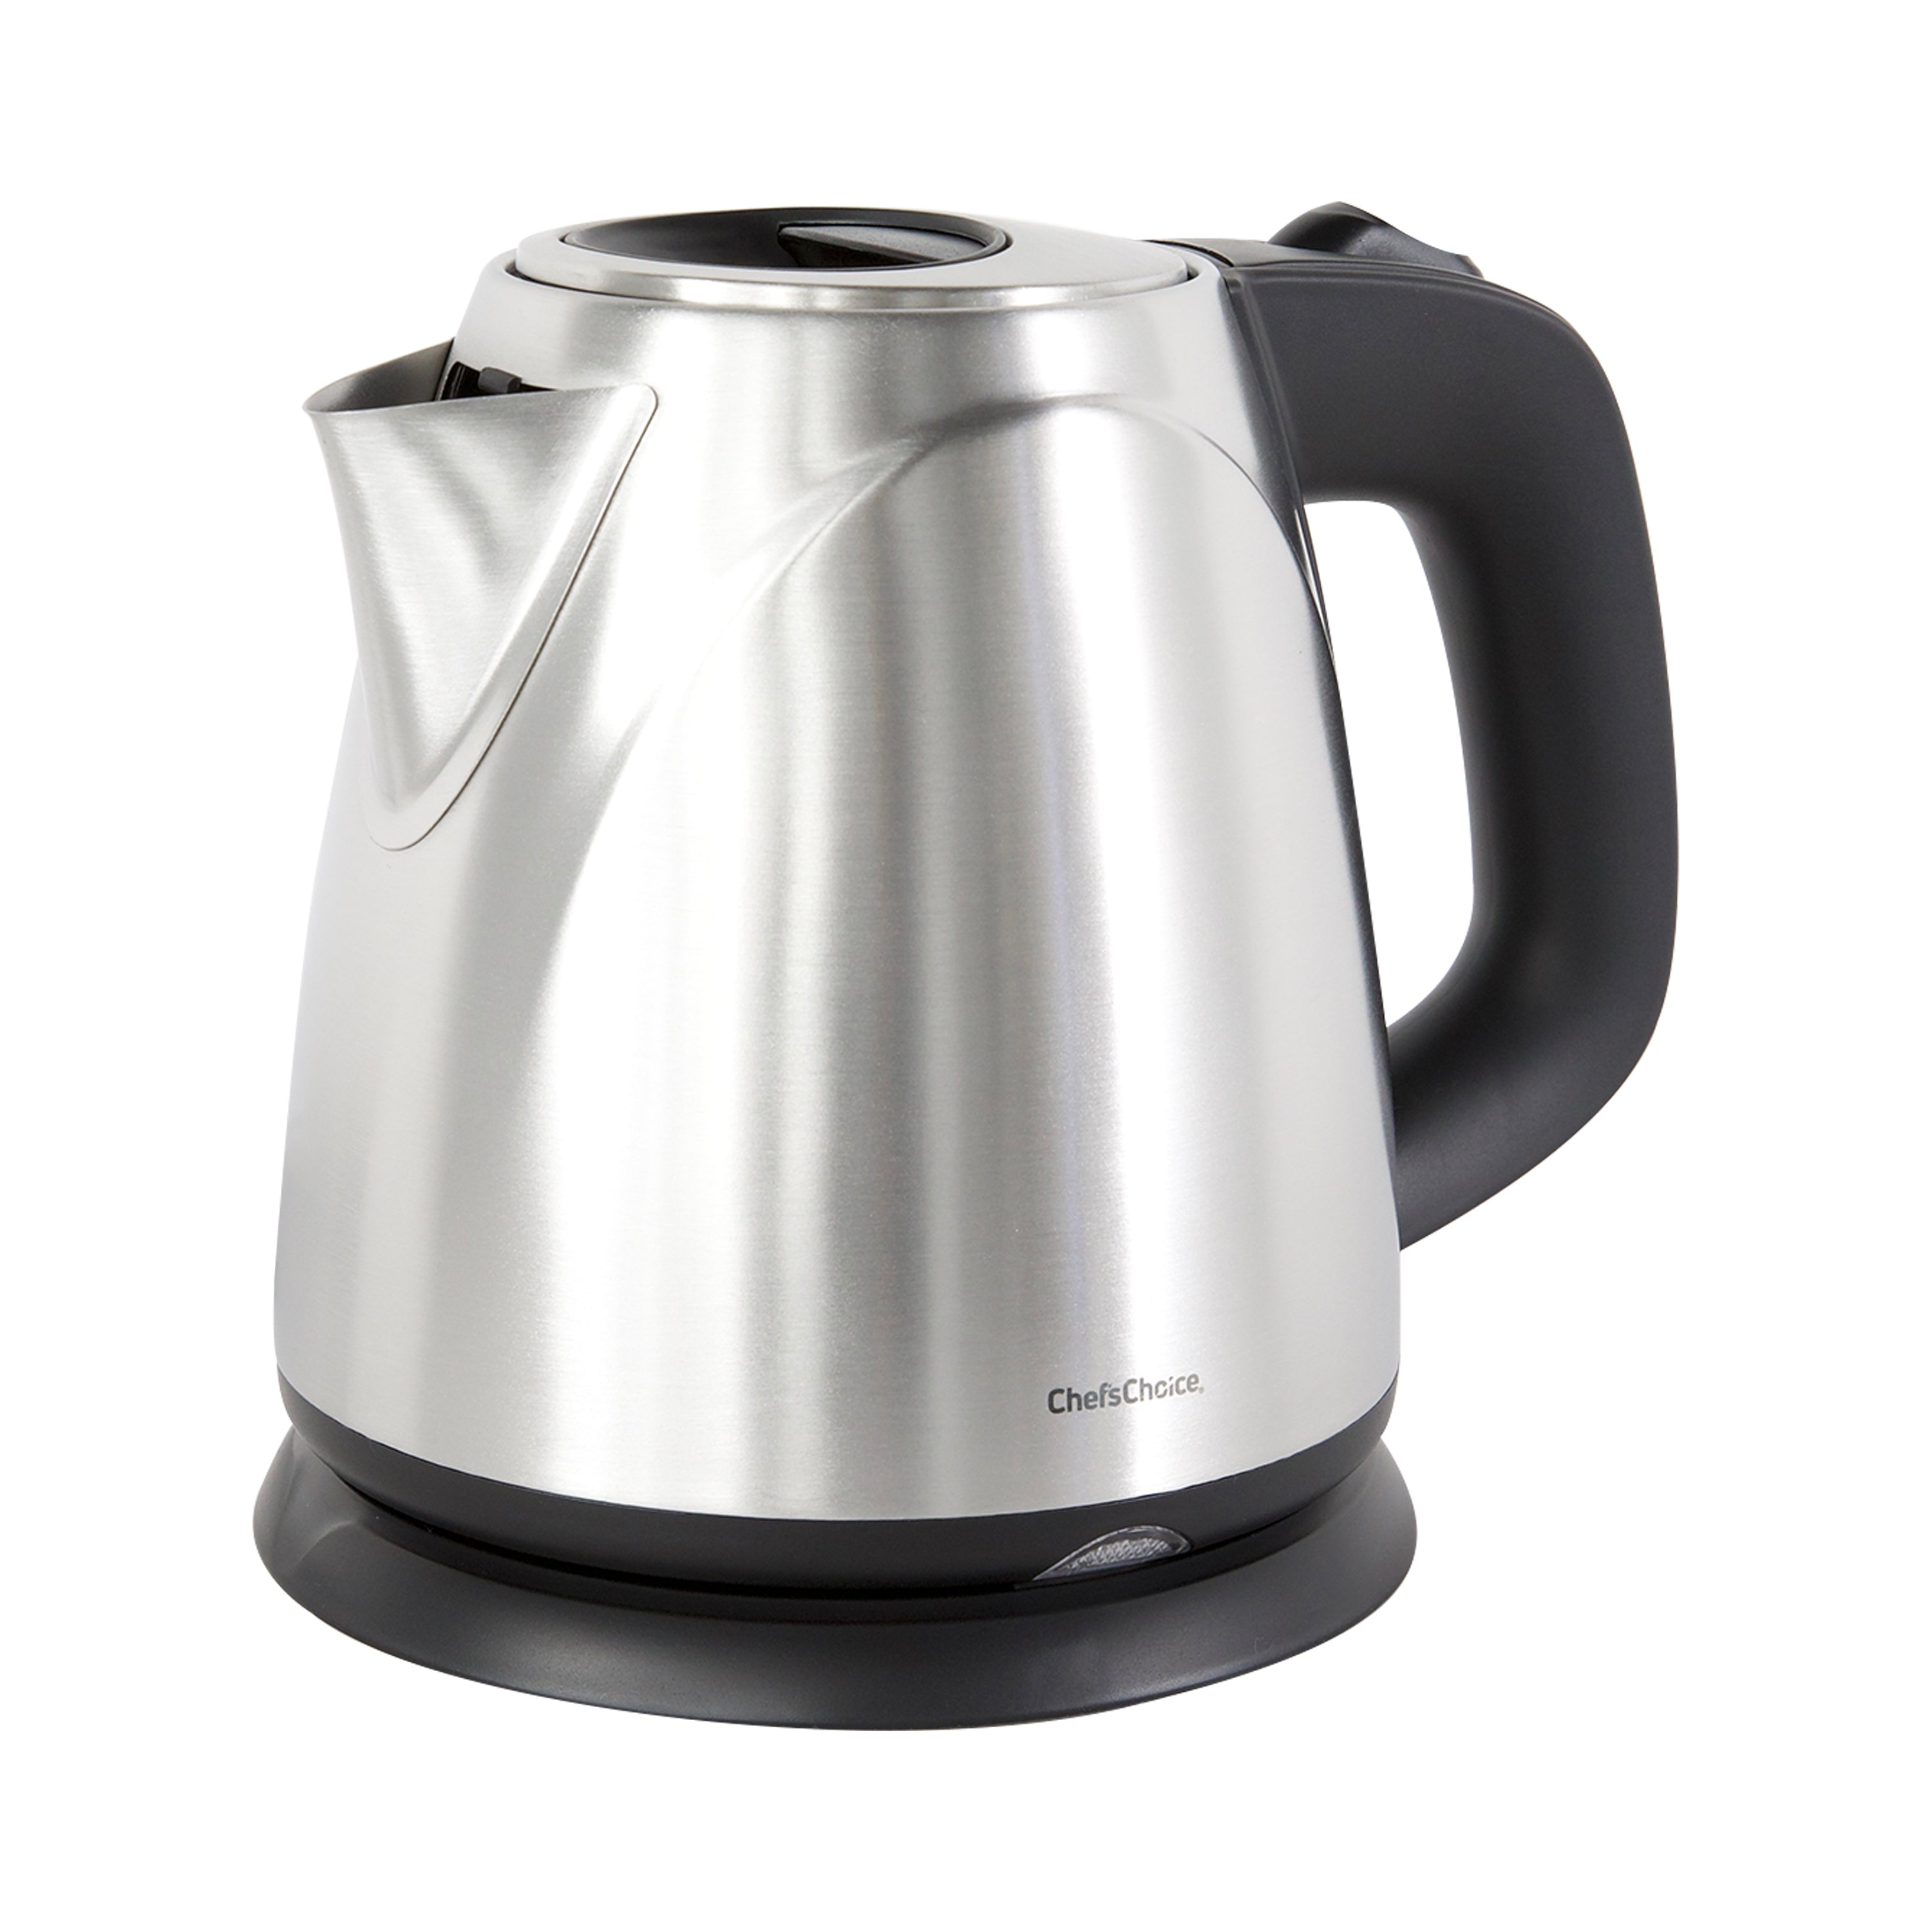 Easily prepare boiling water in minutes with the Chef'sChoice Cordless  Compact Electric Kettle. This lightweight, compact tea kettle features a  one-quart capacity. It's perfect for preparing boiling water for tea,  coffee, hot